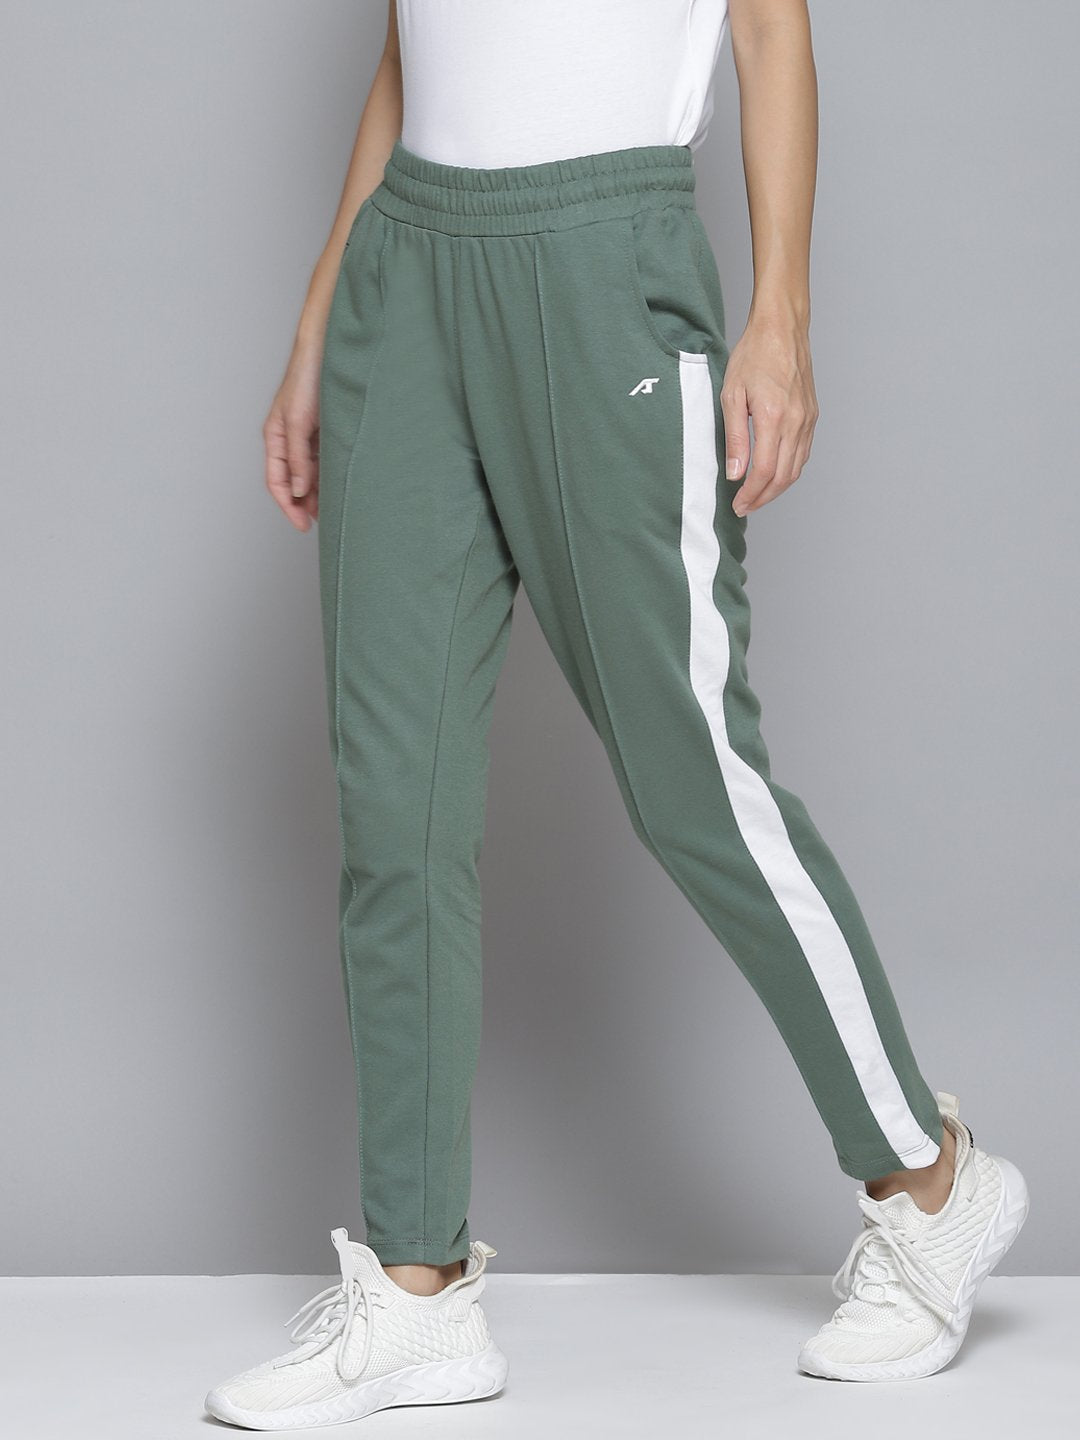 Shop Side-Striped Track Pants for Men from latest collection at Forever 21  | 472926